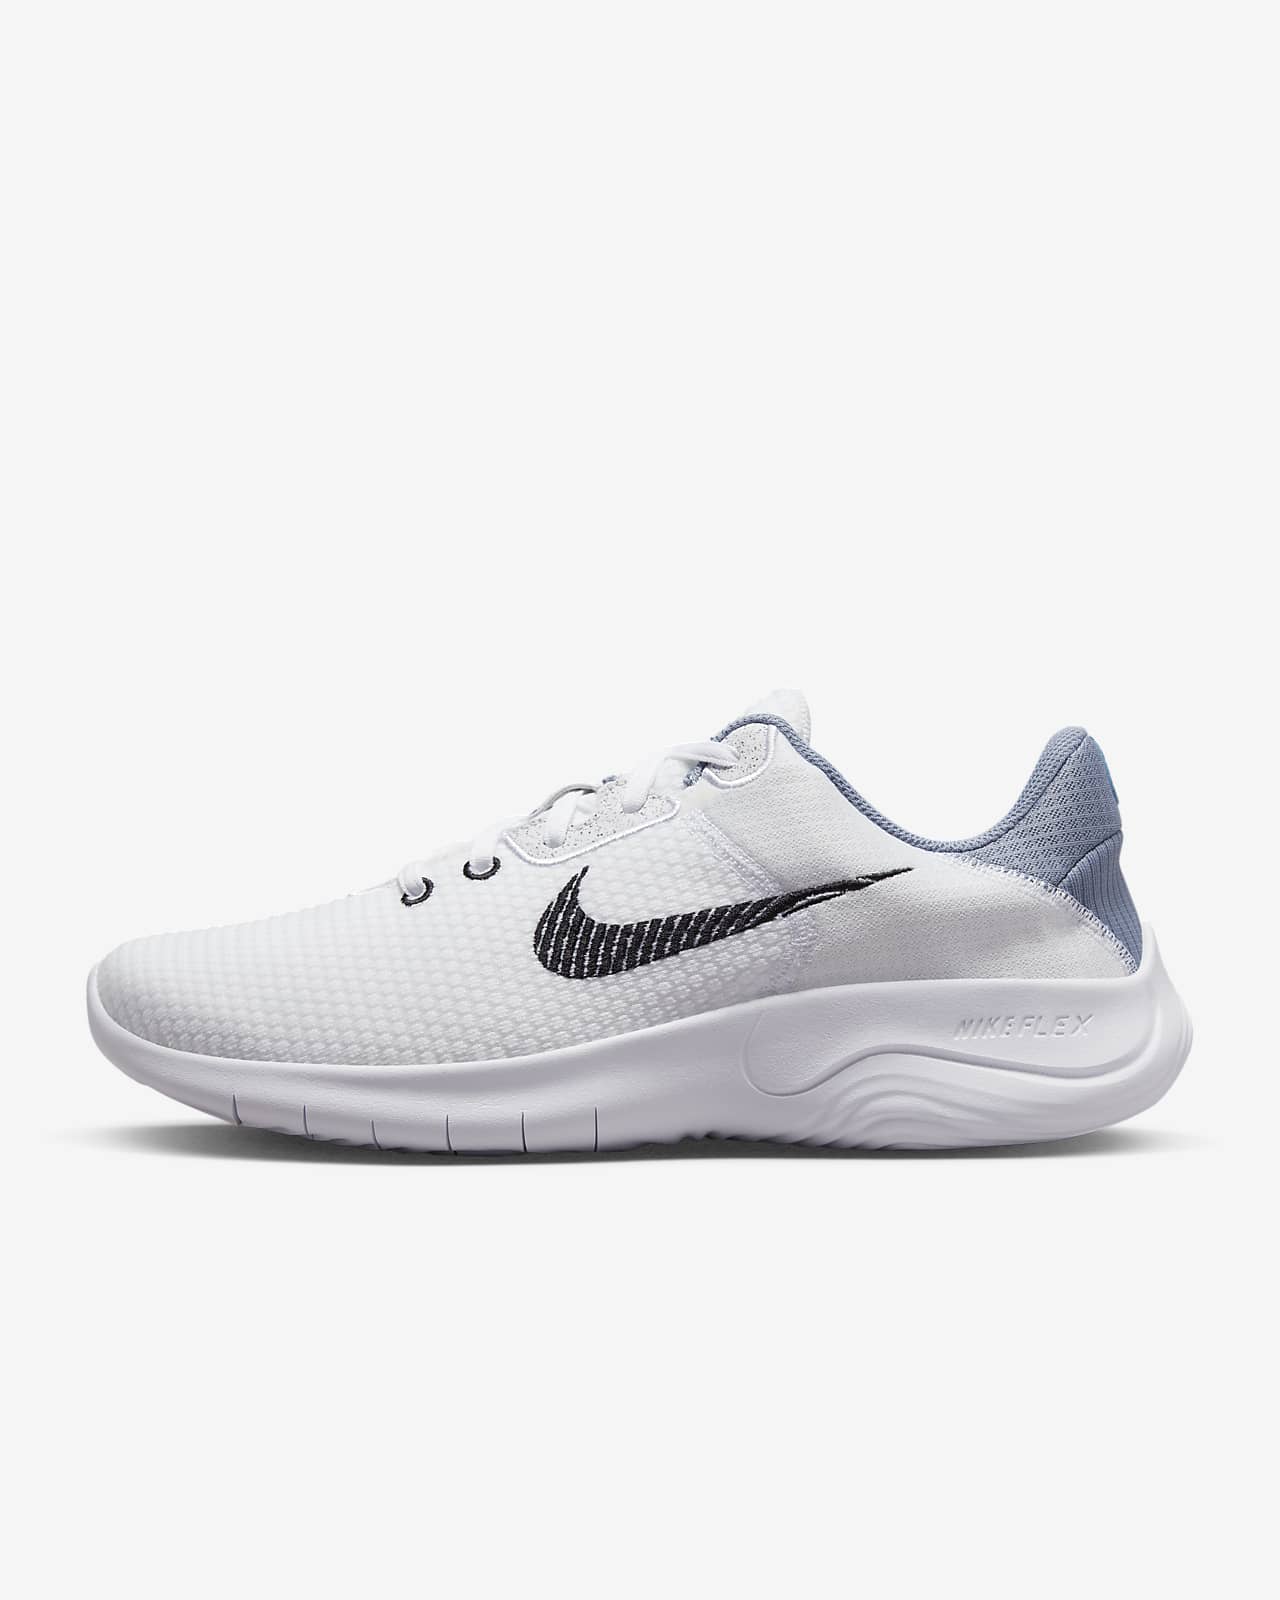 nike men's stability shoes